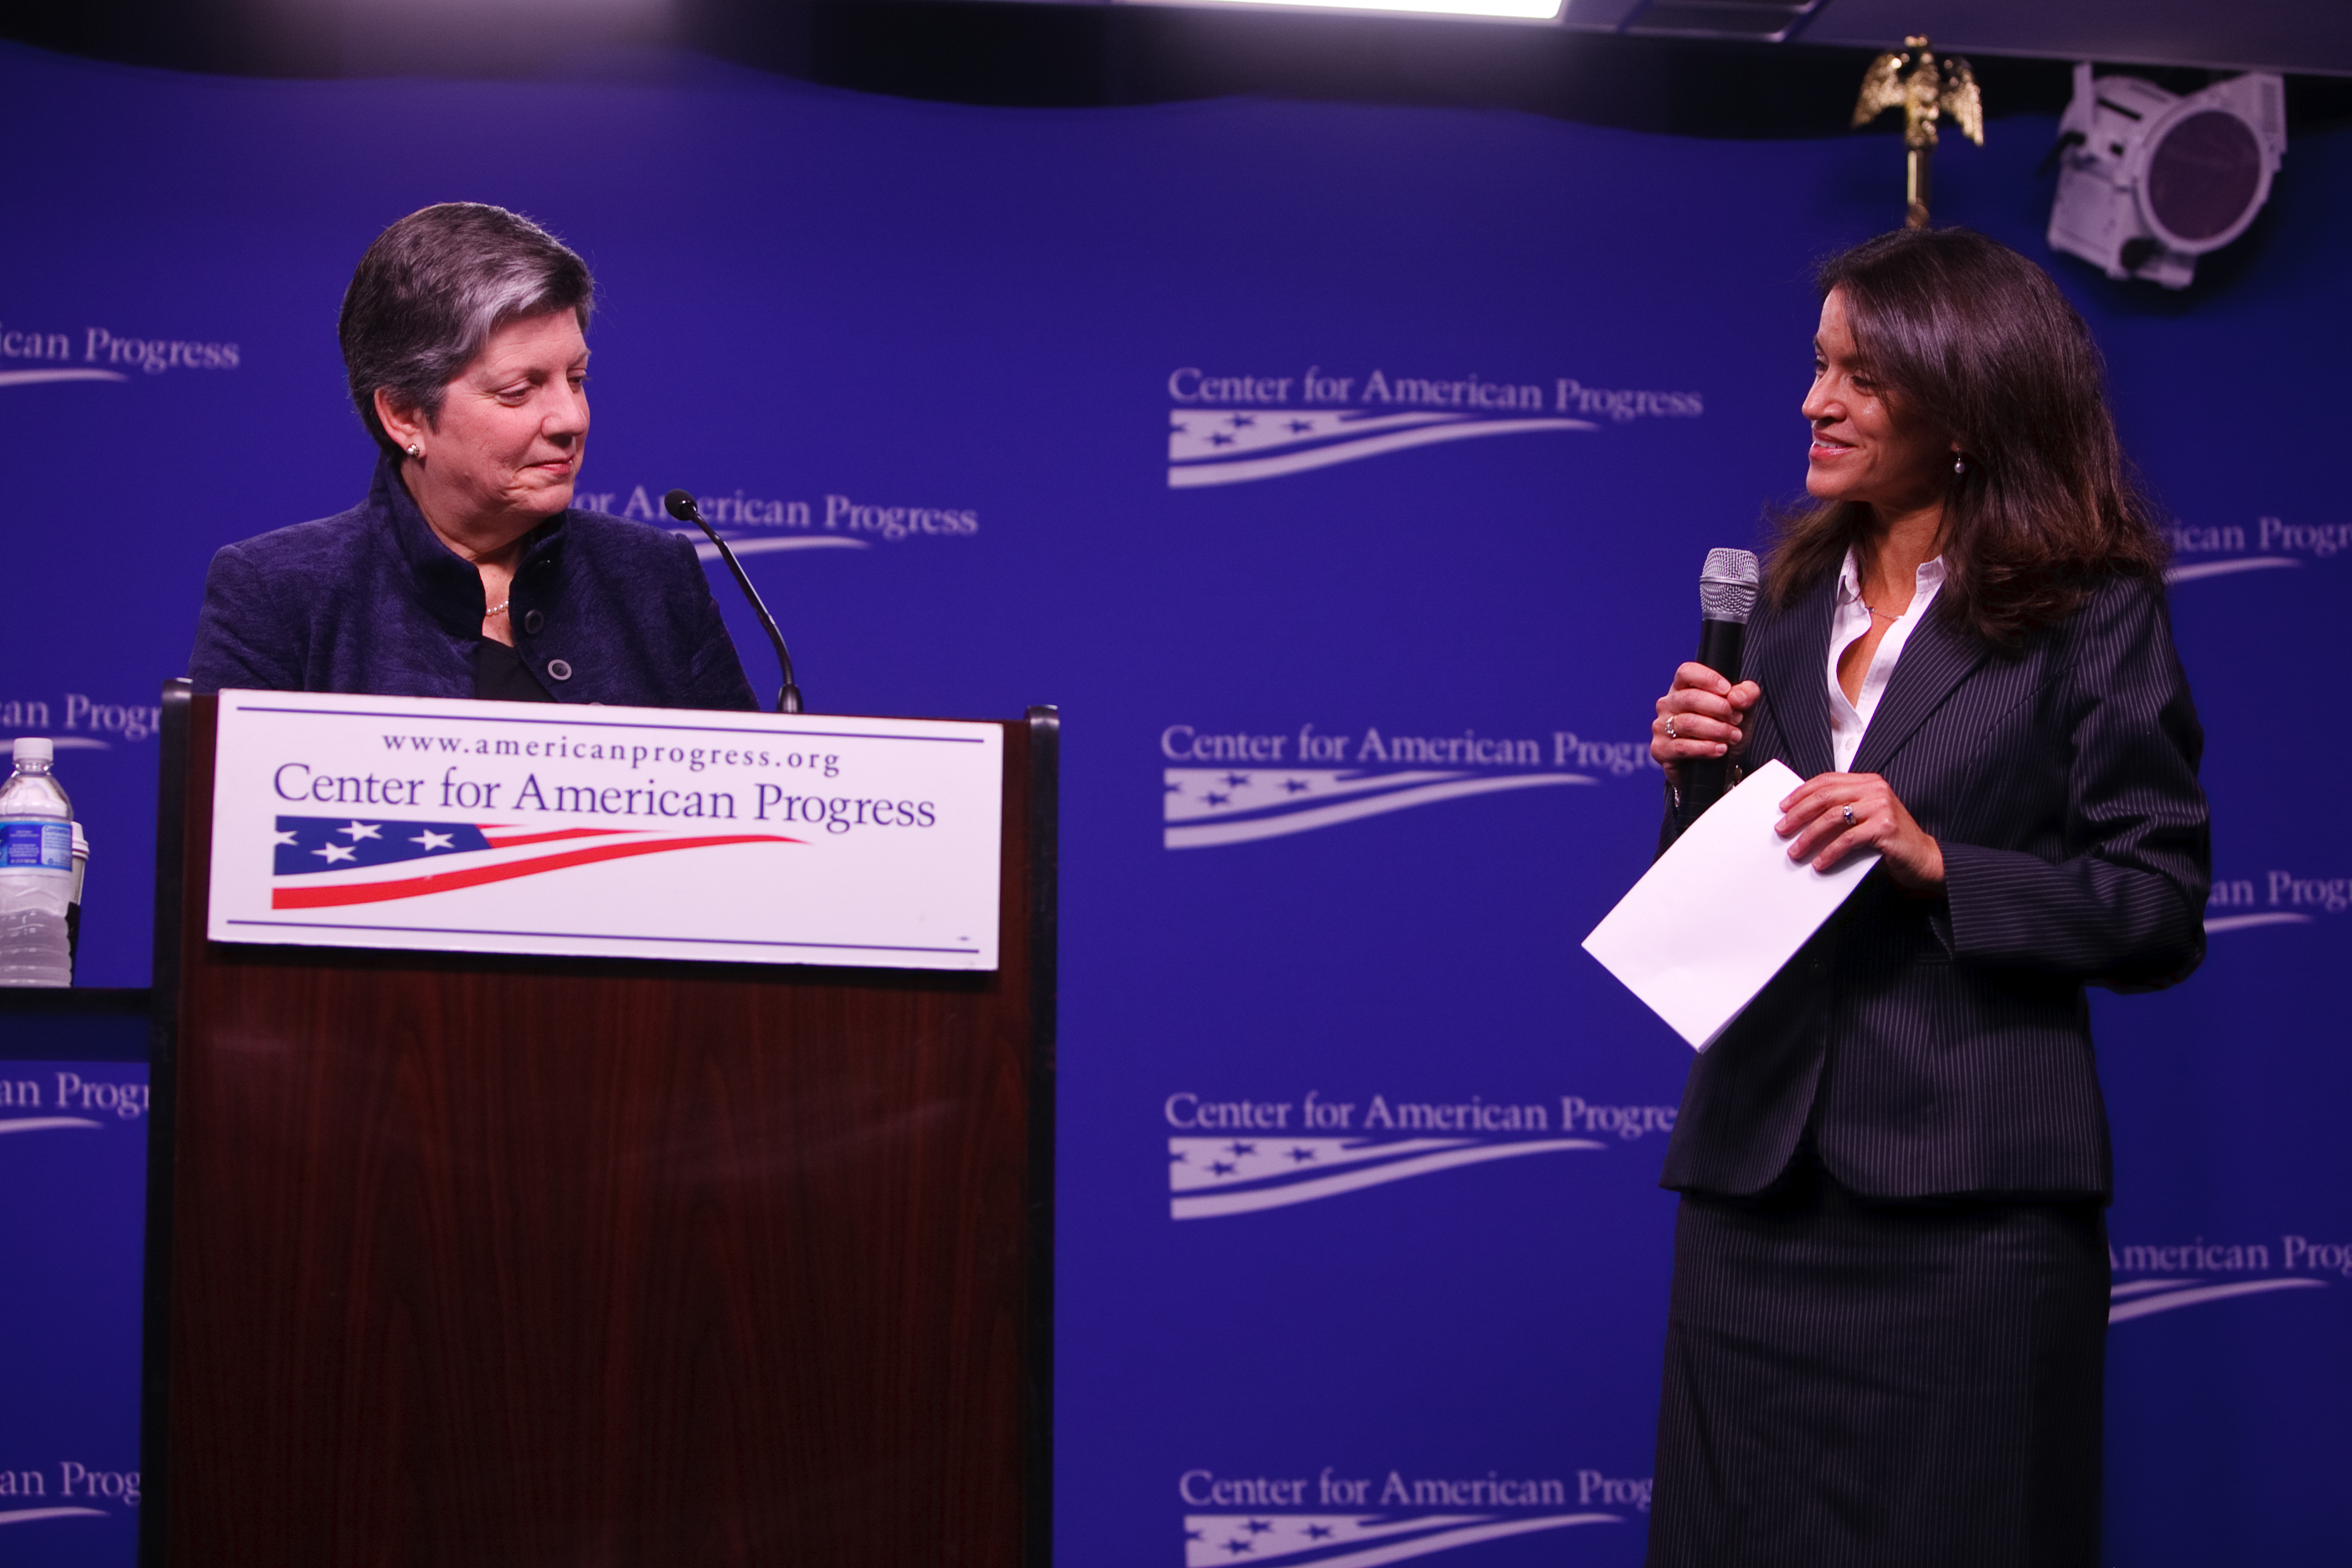 Secretary of the U.S. Department of Homeland Security Janet Napolitano and Angela M. Kelley